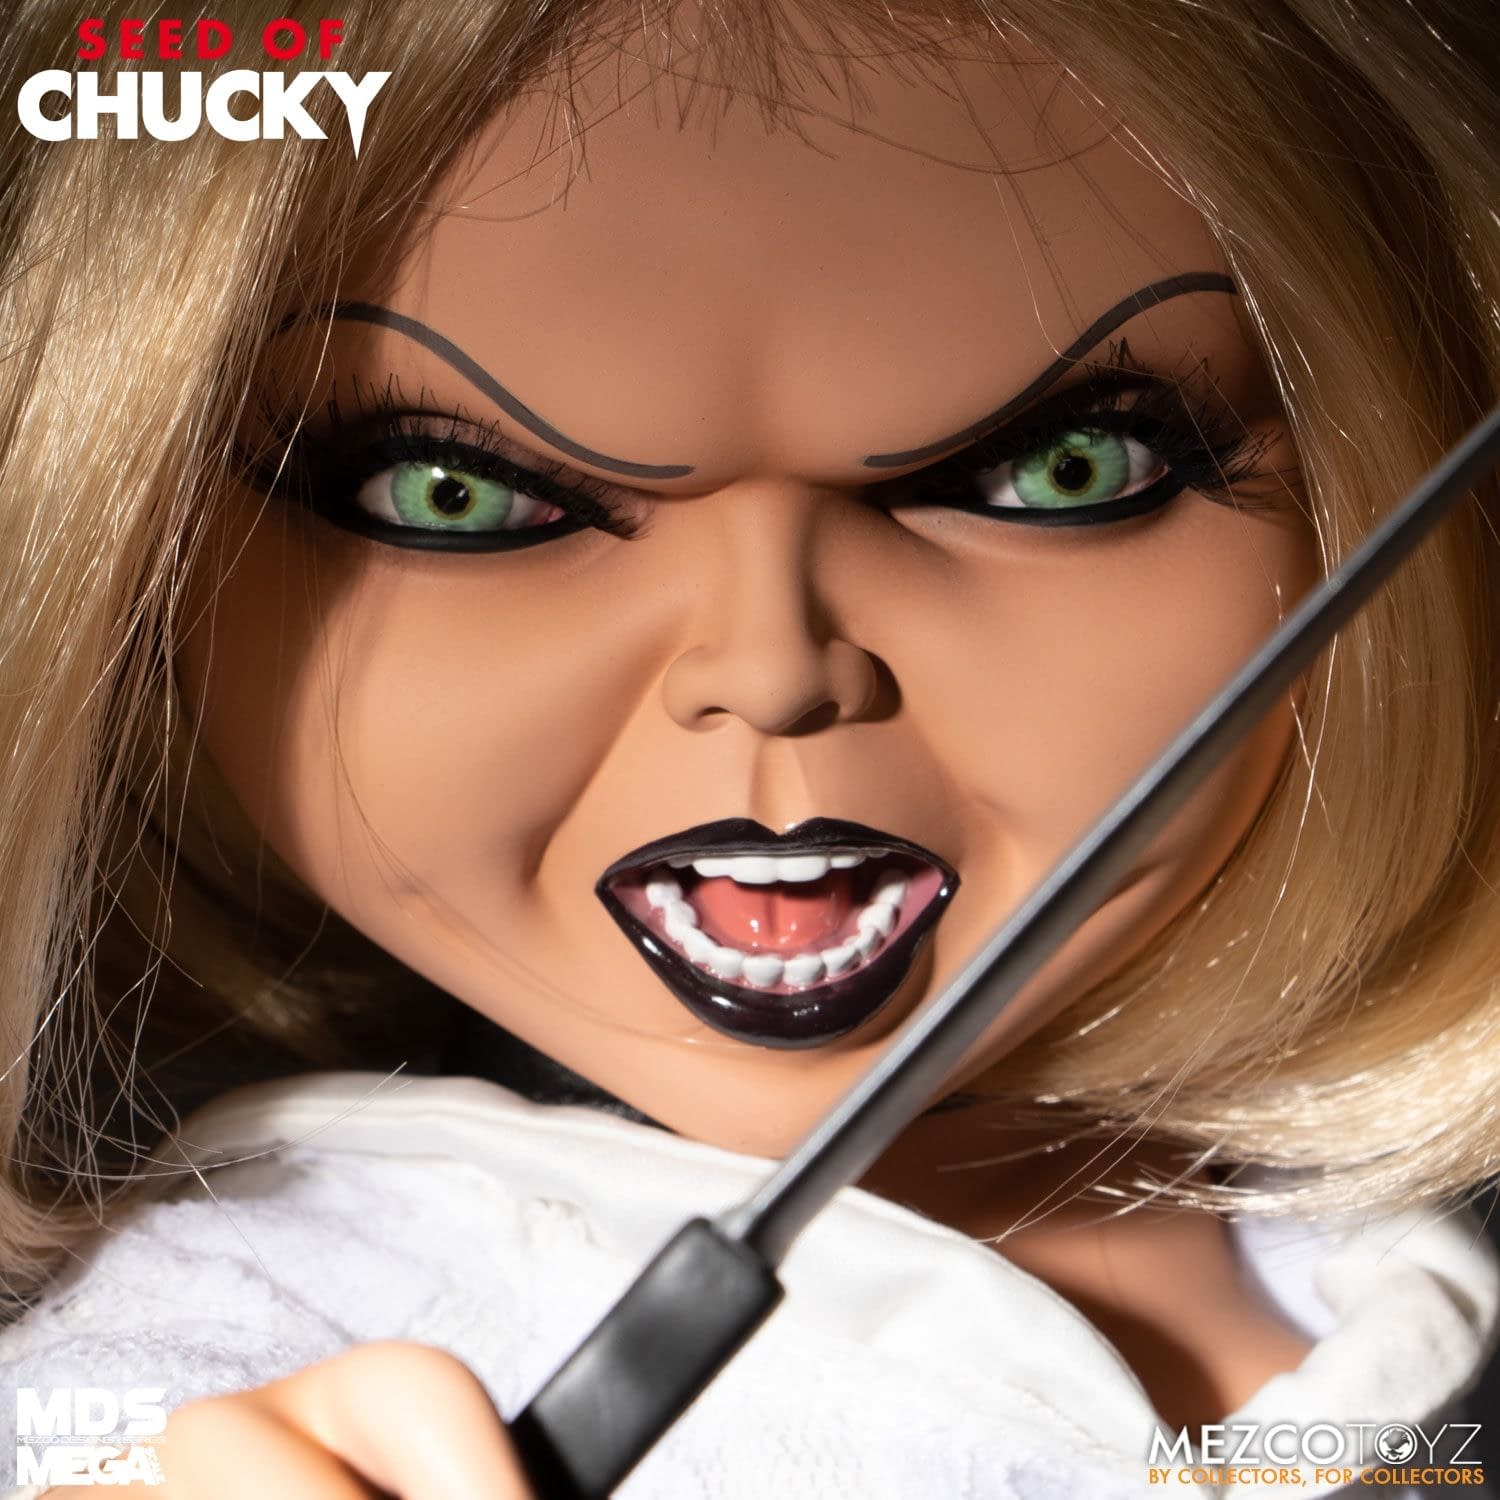 Mezco Gives a Voice to Tiffany from 